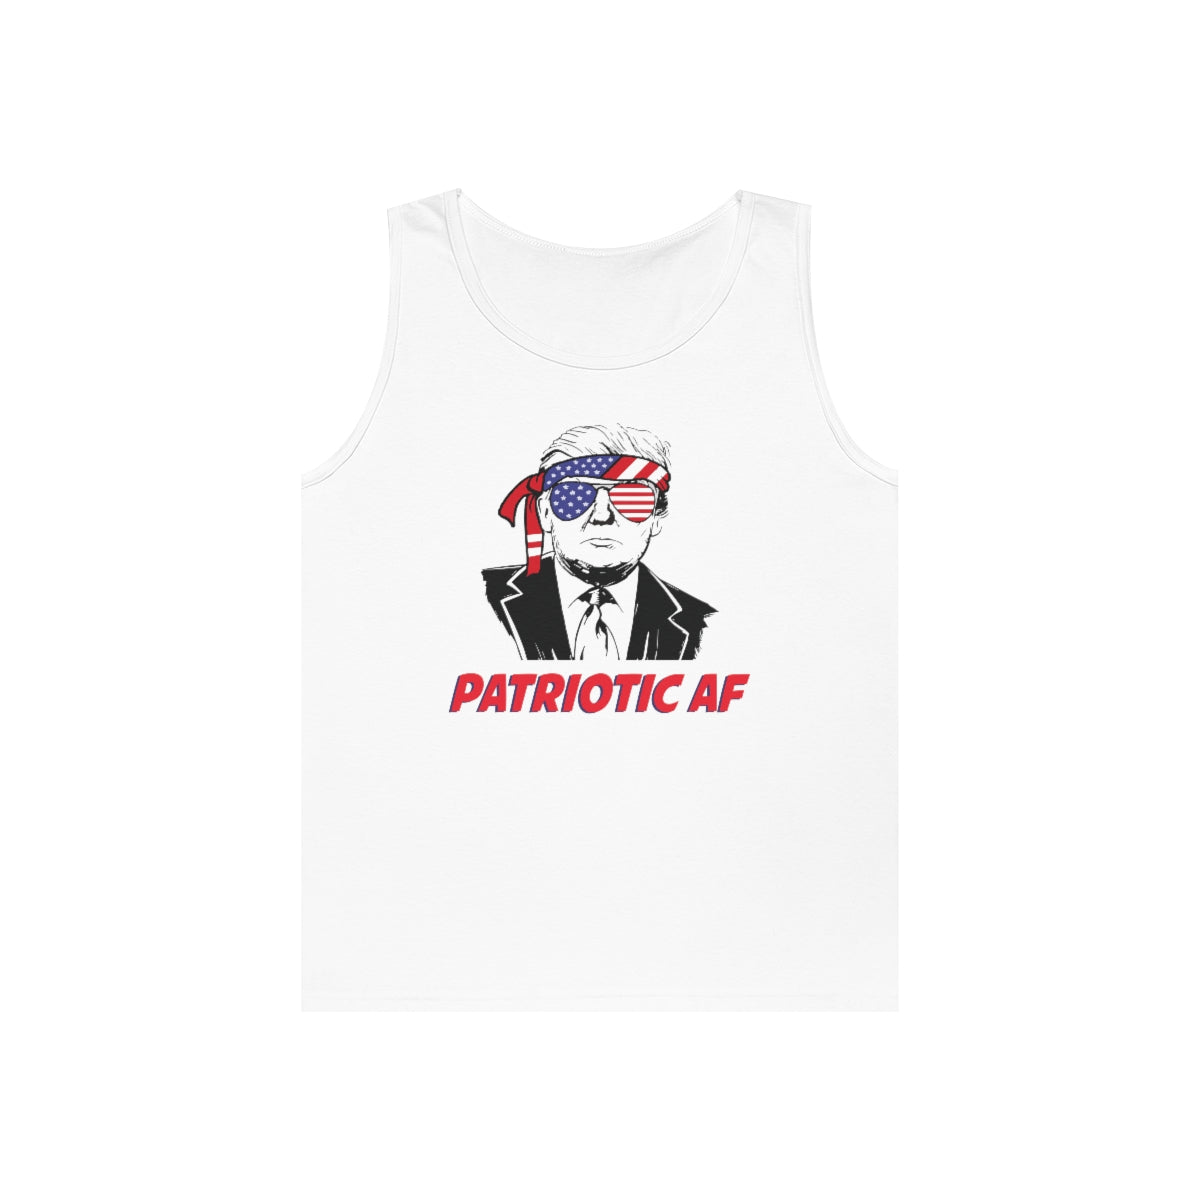 Patriotic AF with Trump | Men's Heavy Cotton Tank Top - Rise of The New Media